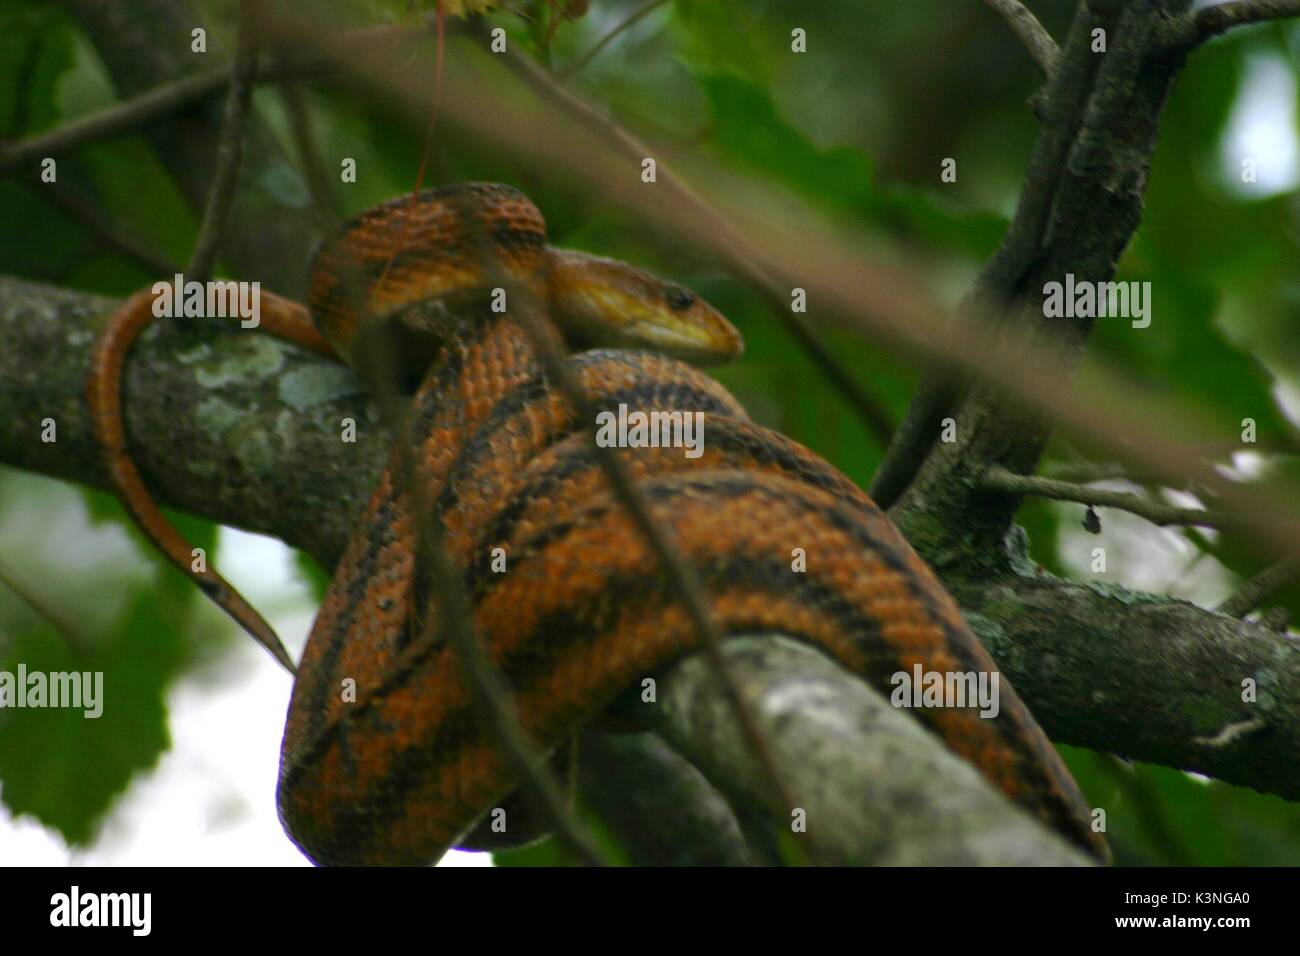 Large orange snake with brown or black stripes wrapped around a tree branch appears to be a rat snake Stock Photo